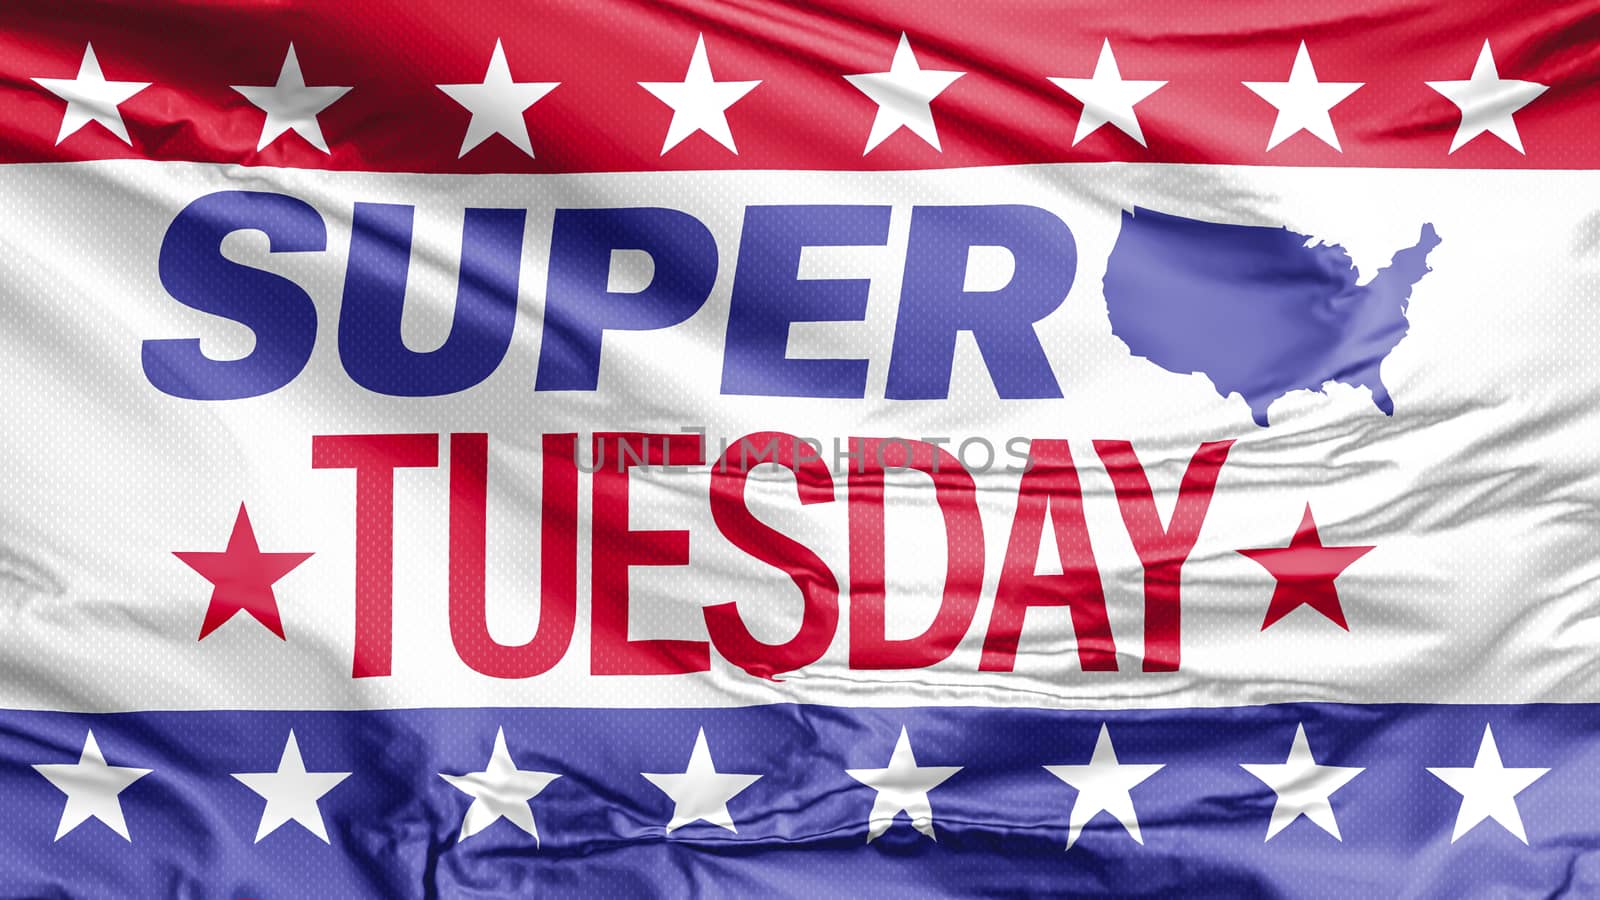 A Super Tuesday waving flag by oasisamuel